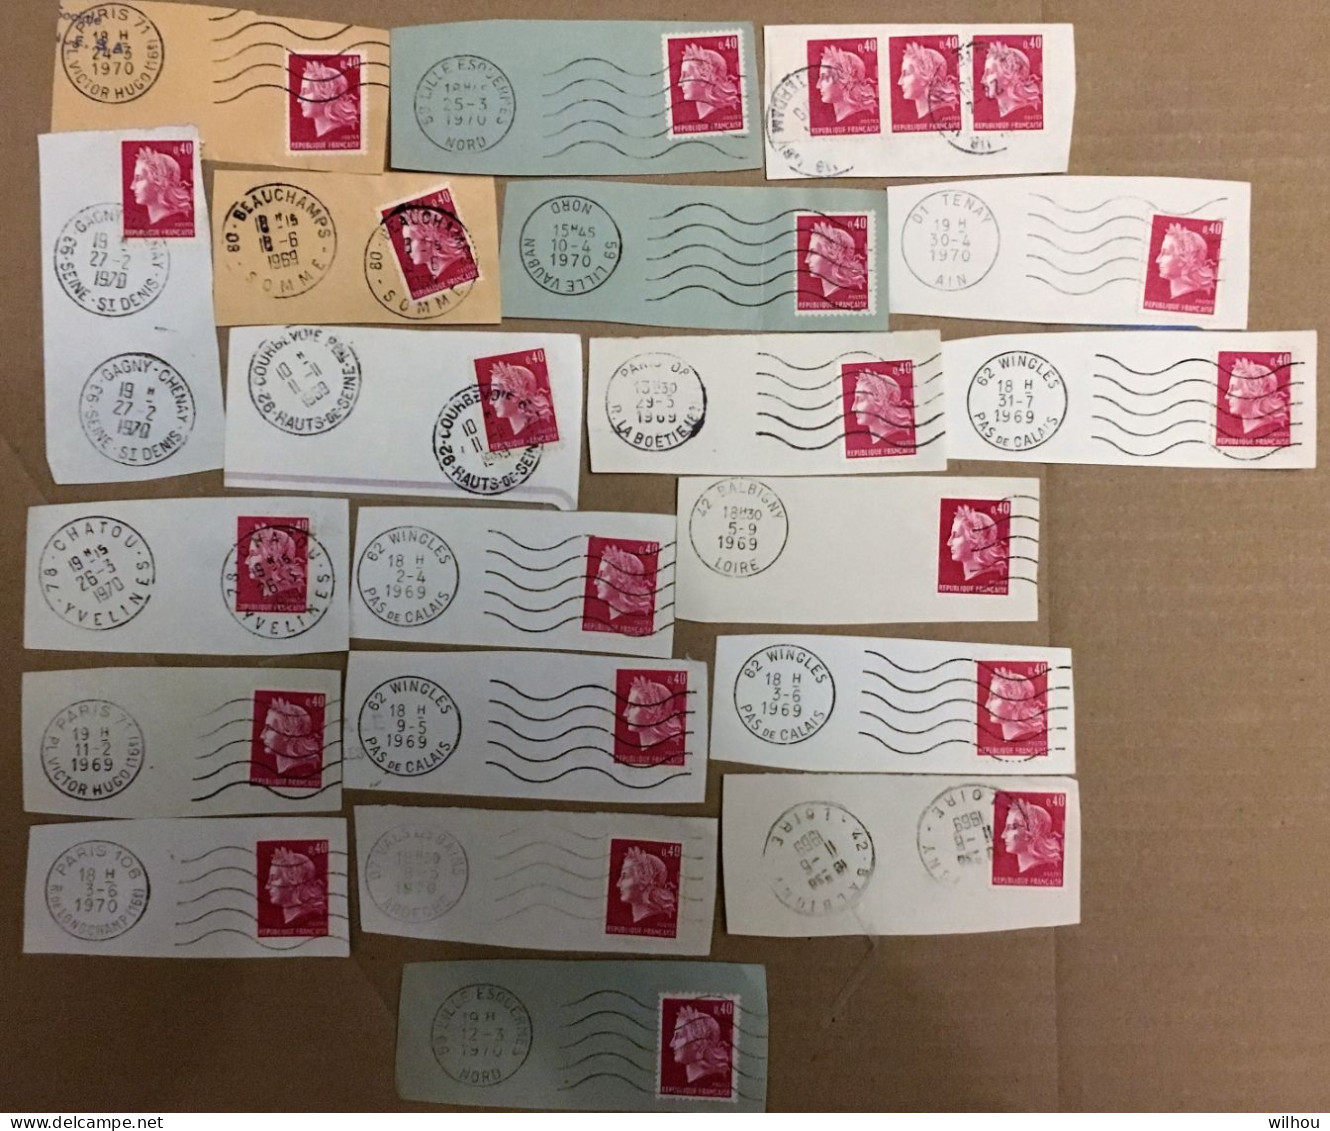 LOT DE 22 TIMBRES MARIANNE CHEFFER OBLITERATIONS PUBLICITAIRES A 0.40 ROUGES N° 1536 B - 1967-1970 Marianne (Cheffer)